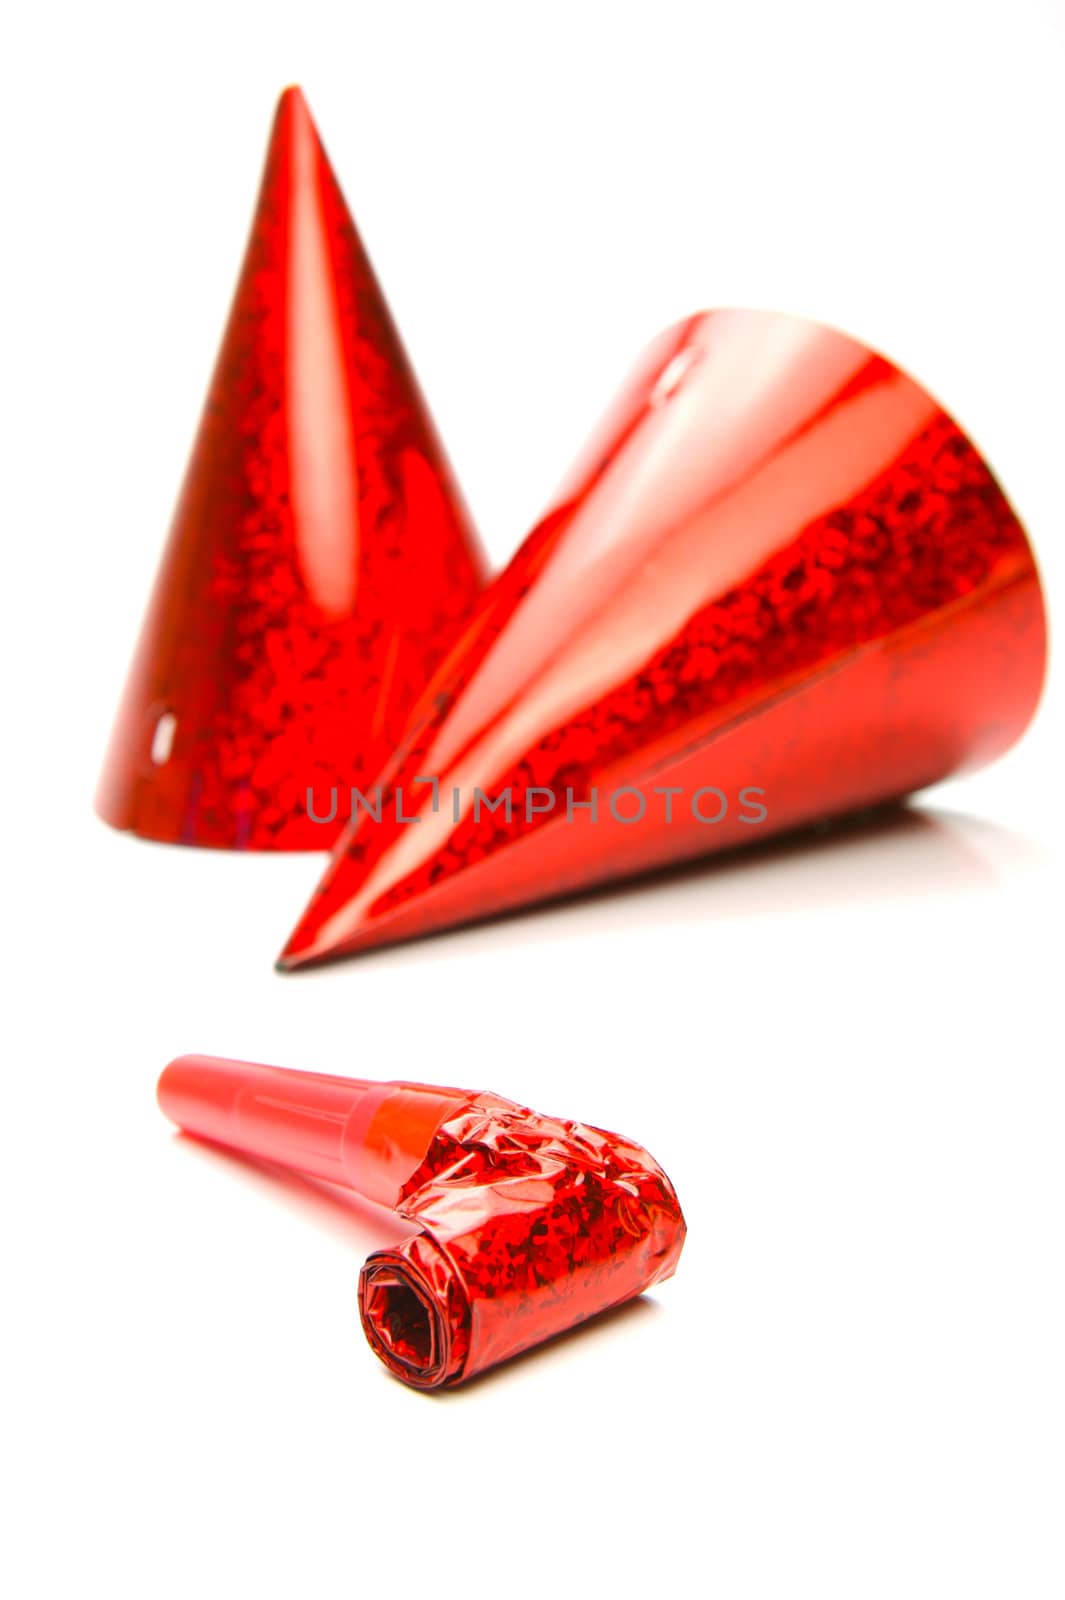 Party hats and blowers isolated against a white background